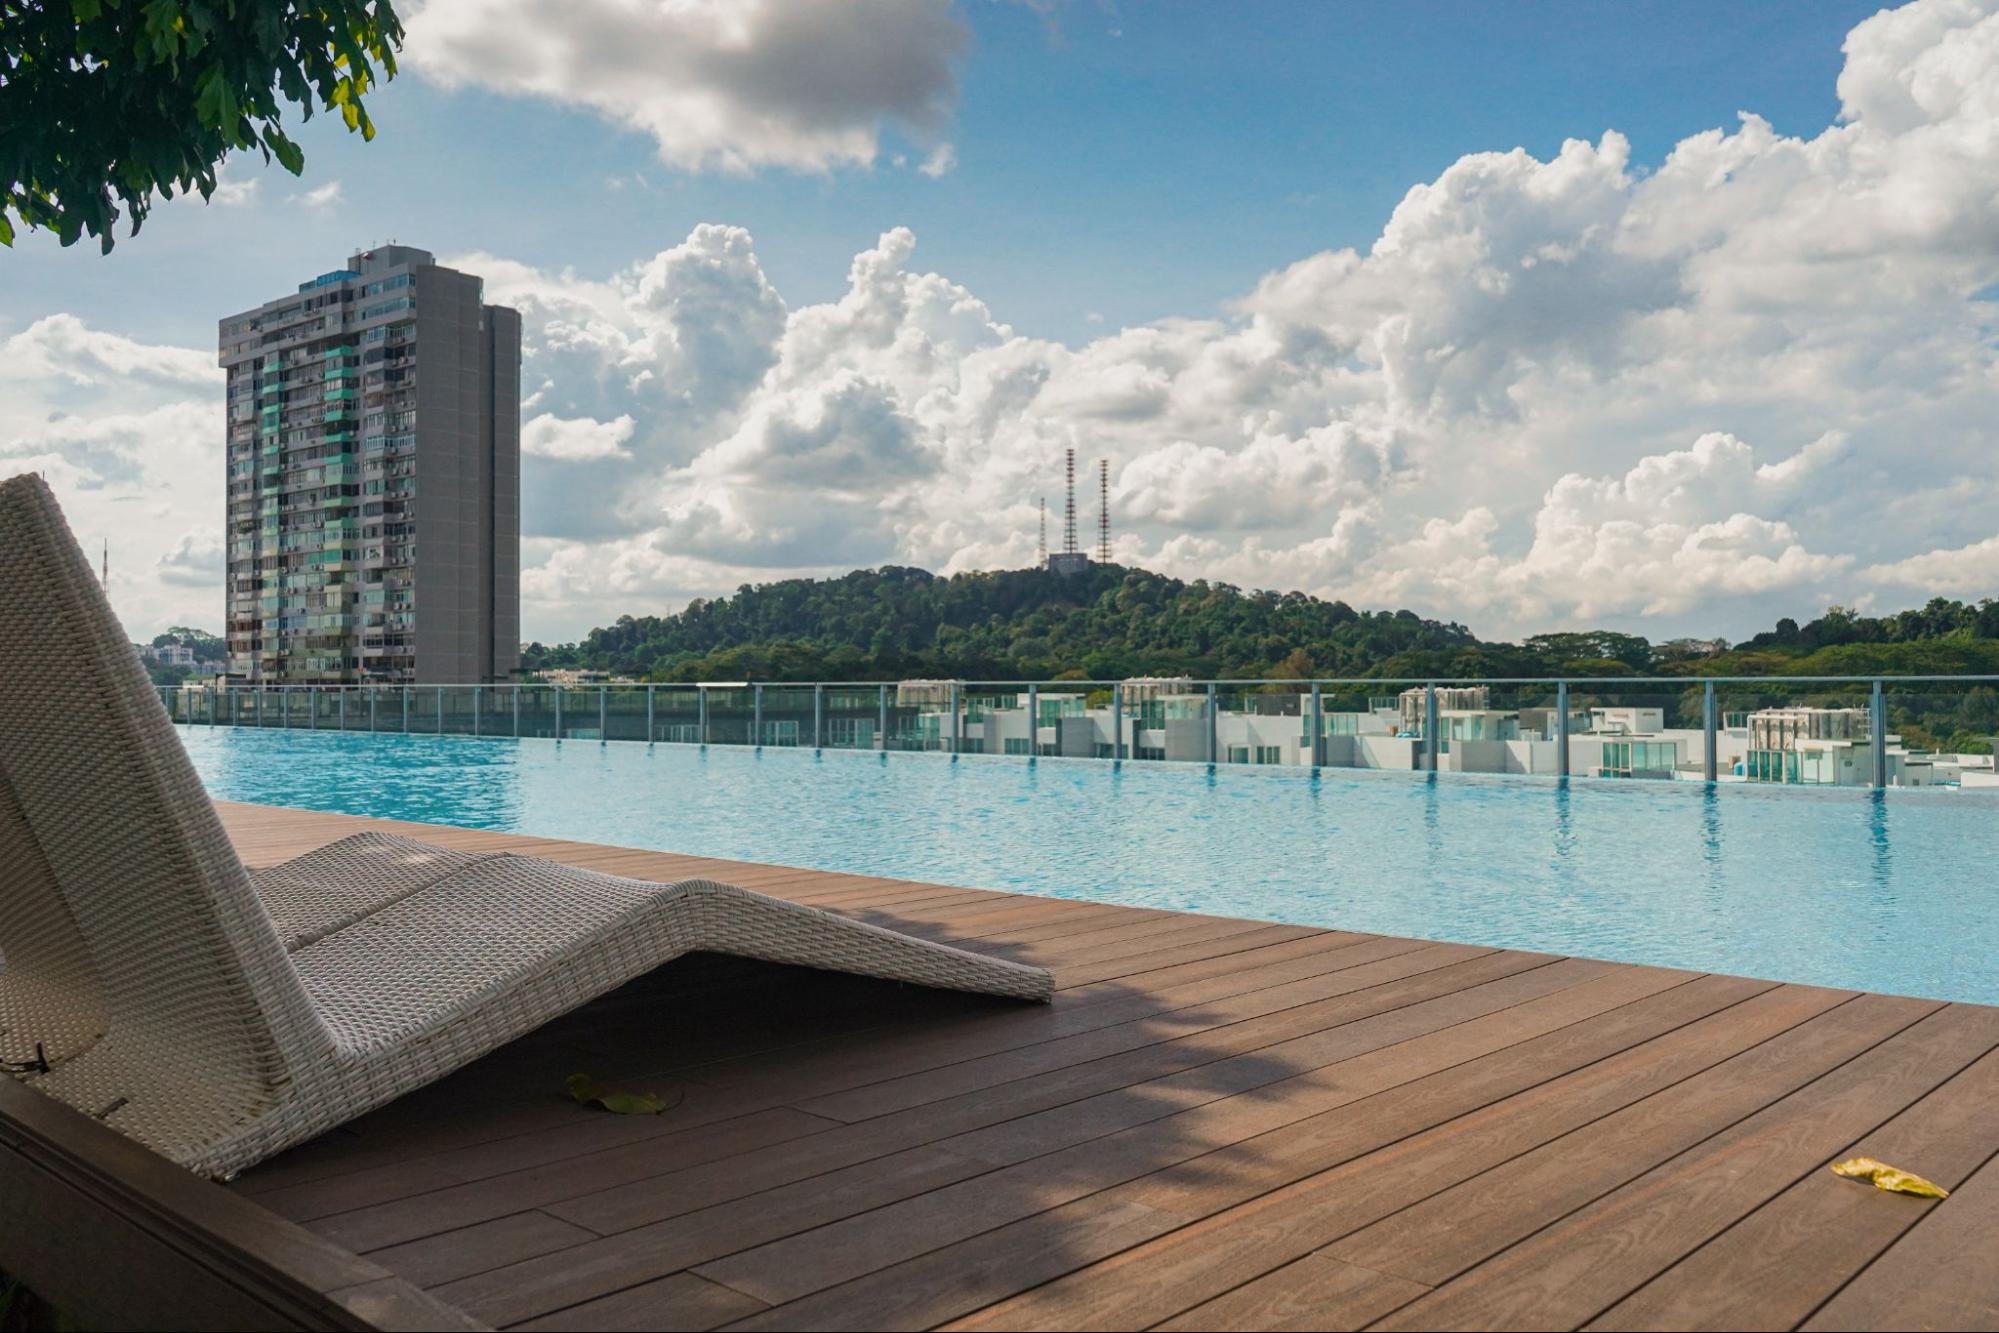 popular outdoor decking options in singapore - Popular Outdoor Decking Options in Singapore